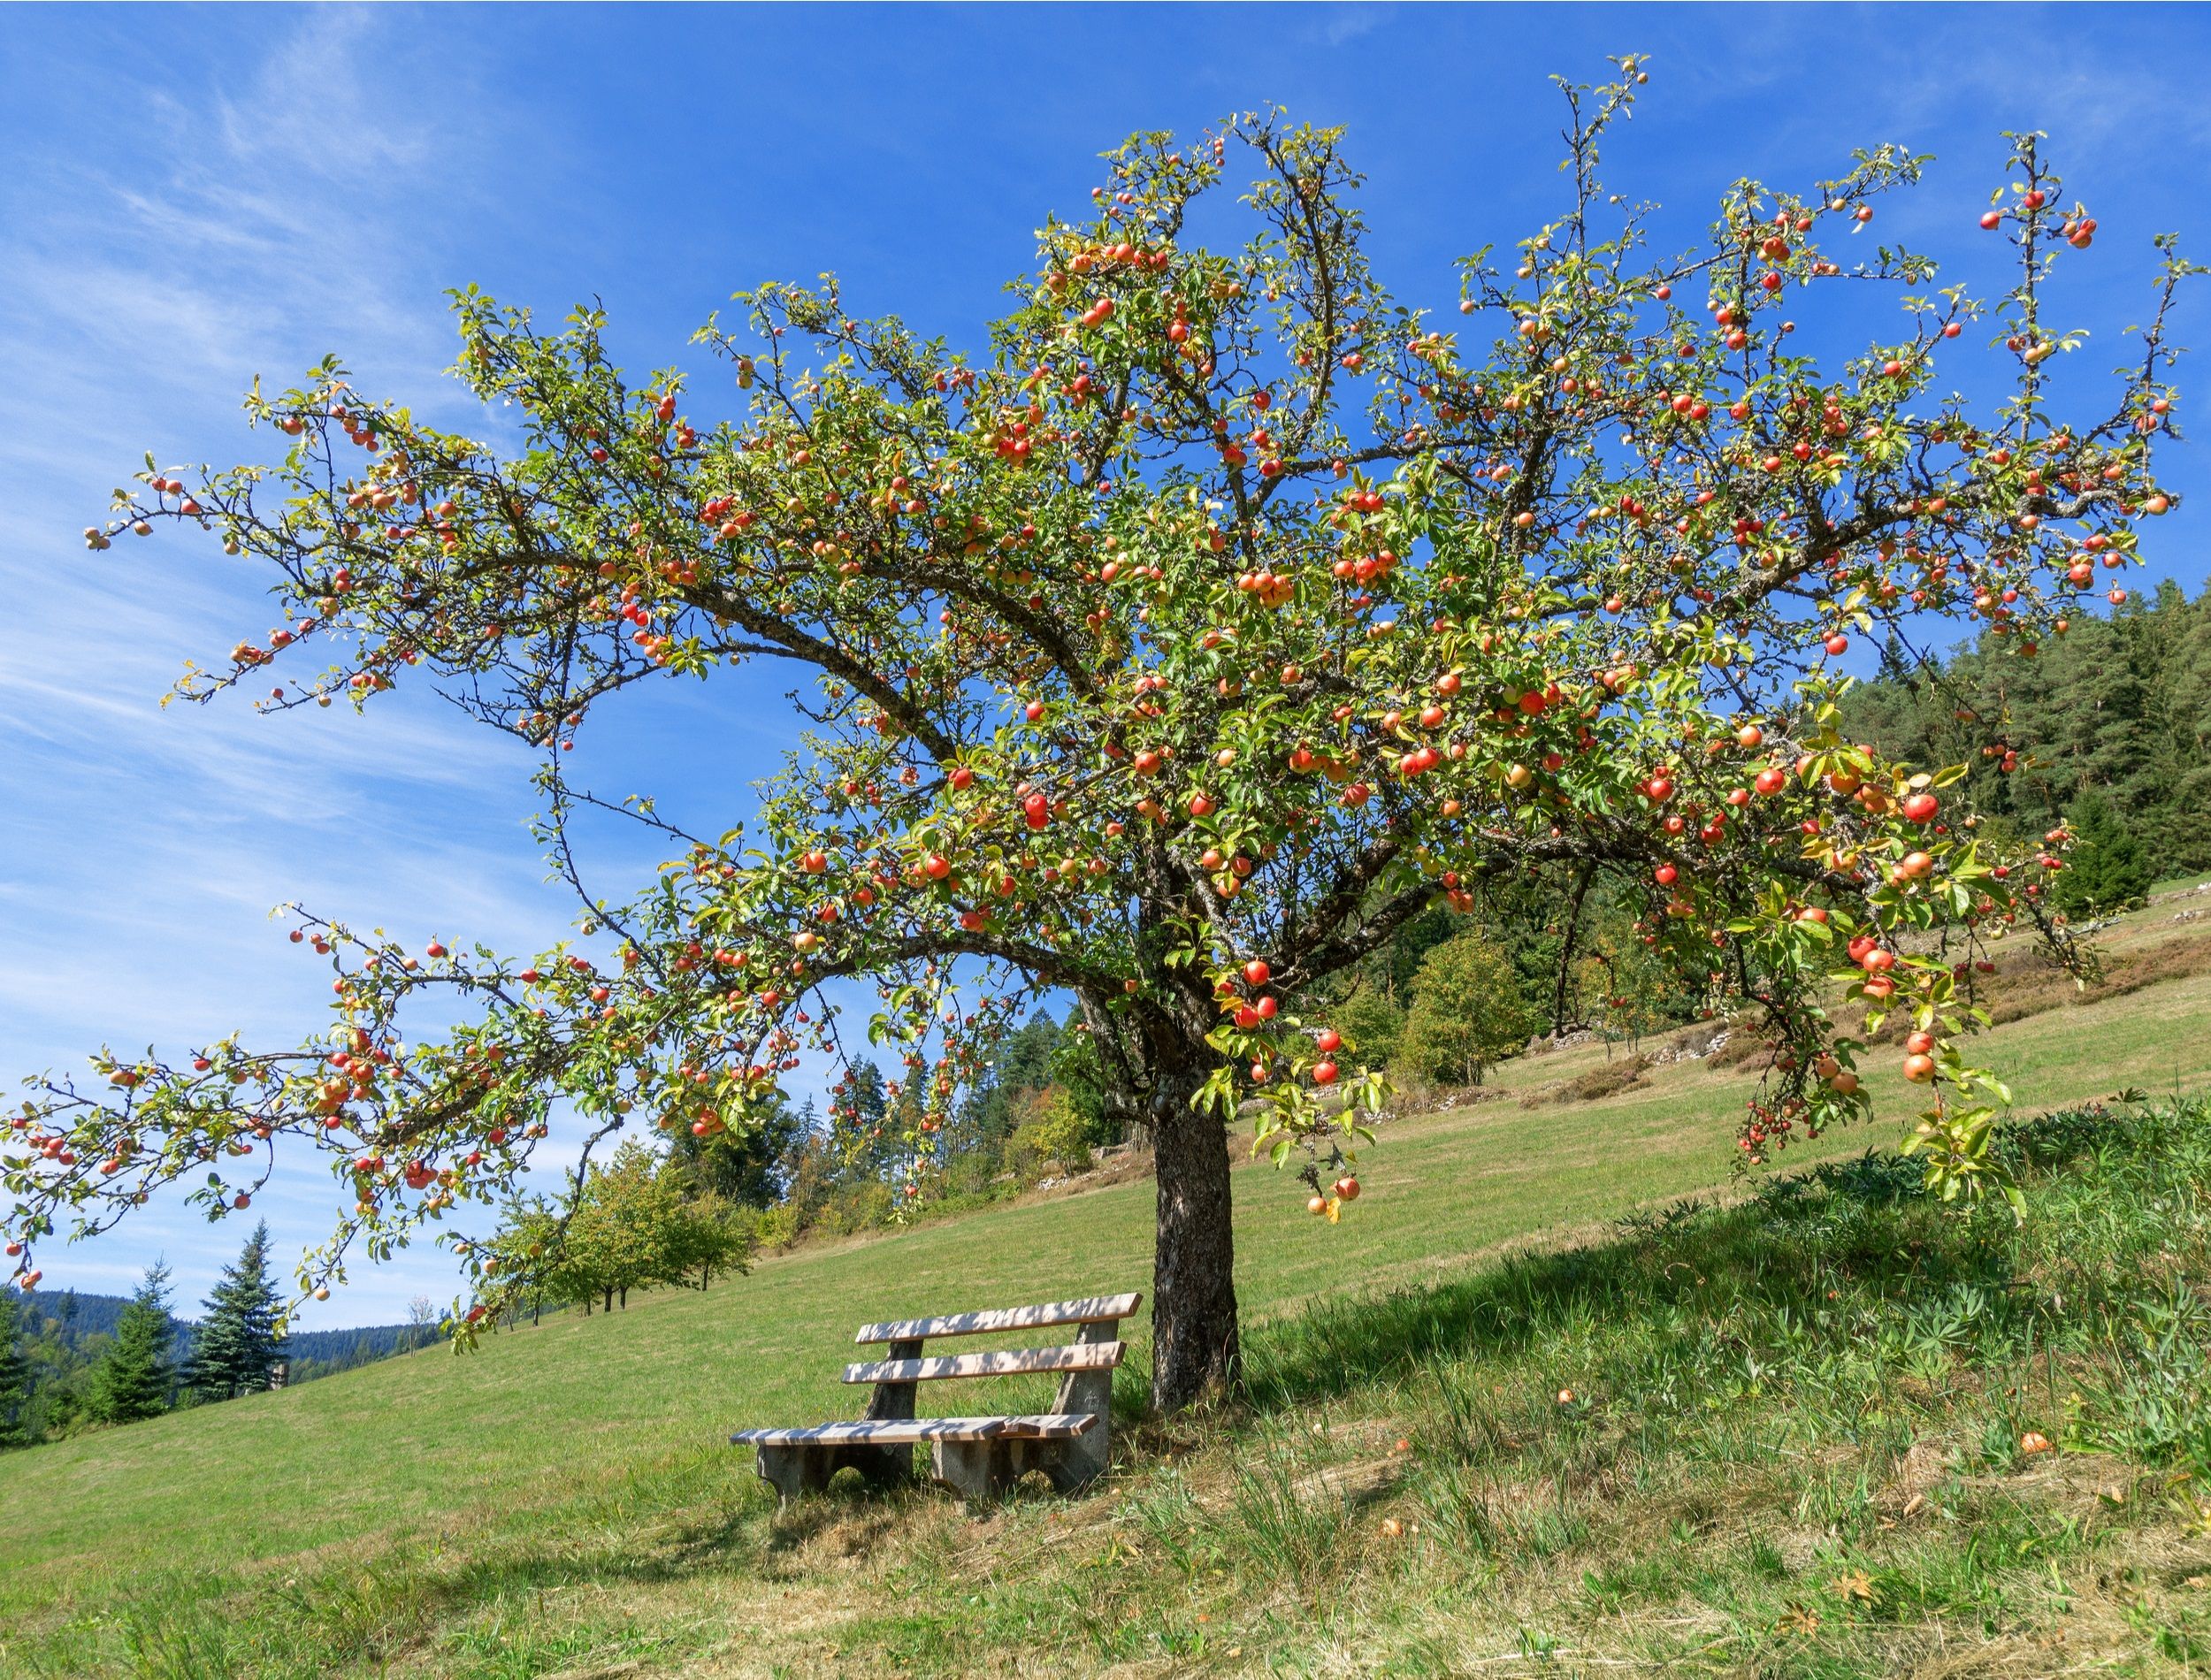 Apple tree full of ripe red apples and with bench below on a slope in autumn